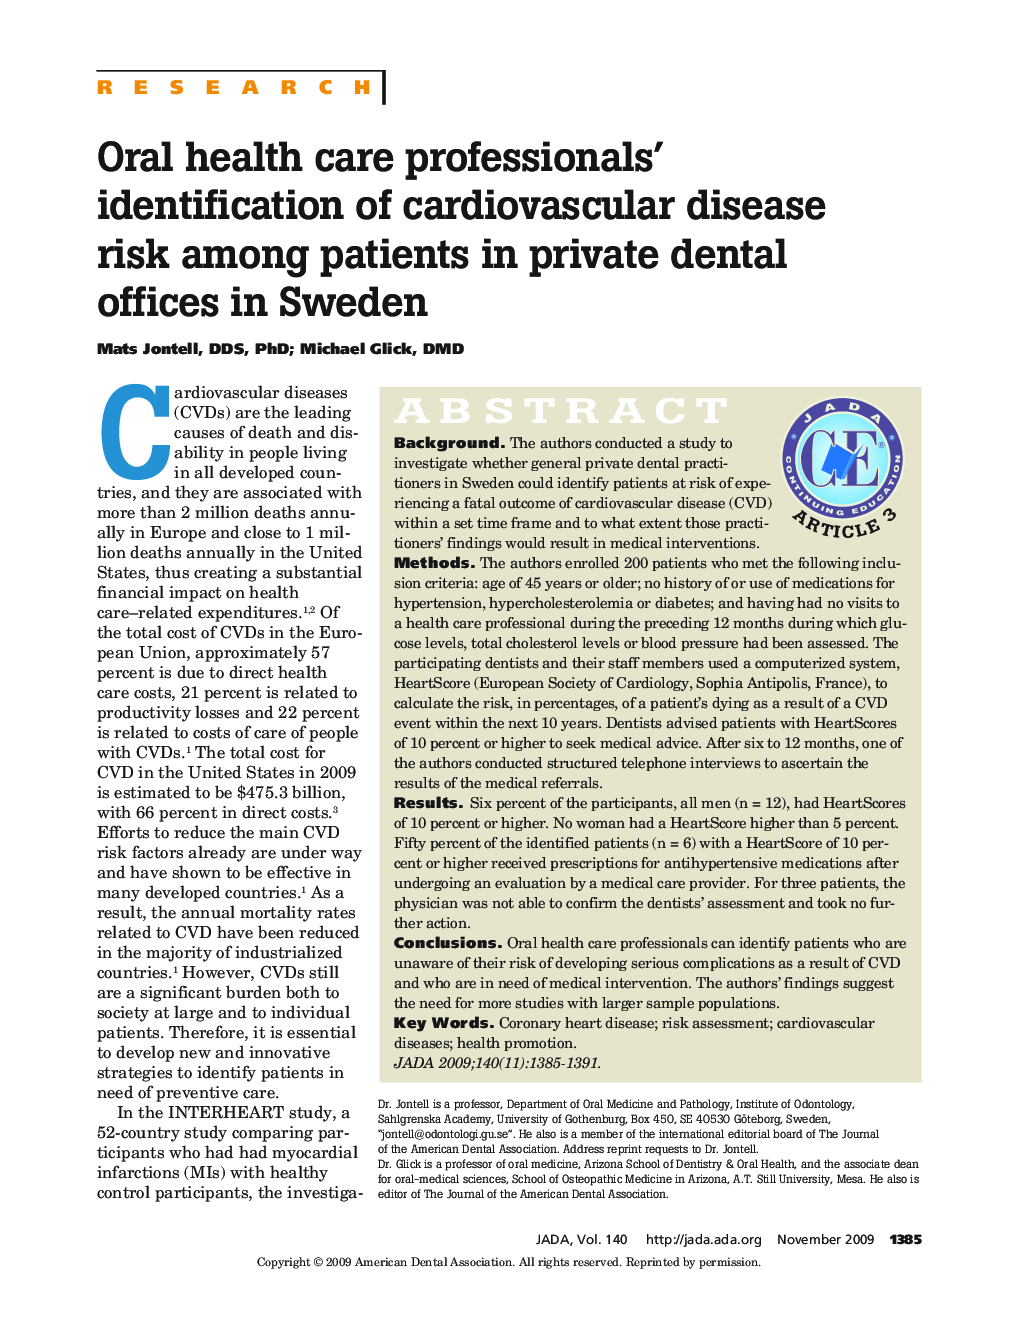 Oral Health Care Professionals' Identification of Cardiovascular Disease Risk Among Patients in Private Dental Offices in Sweden 